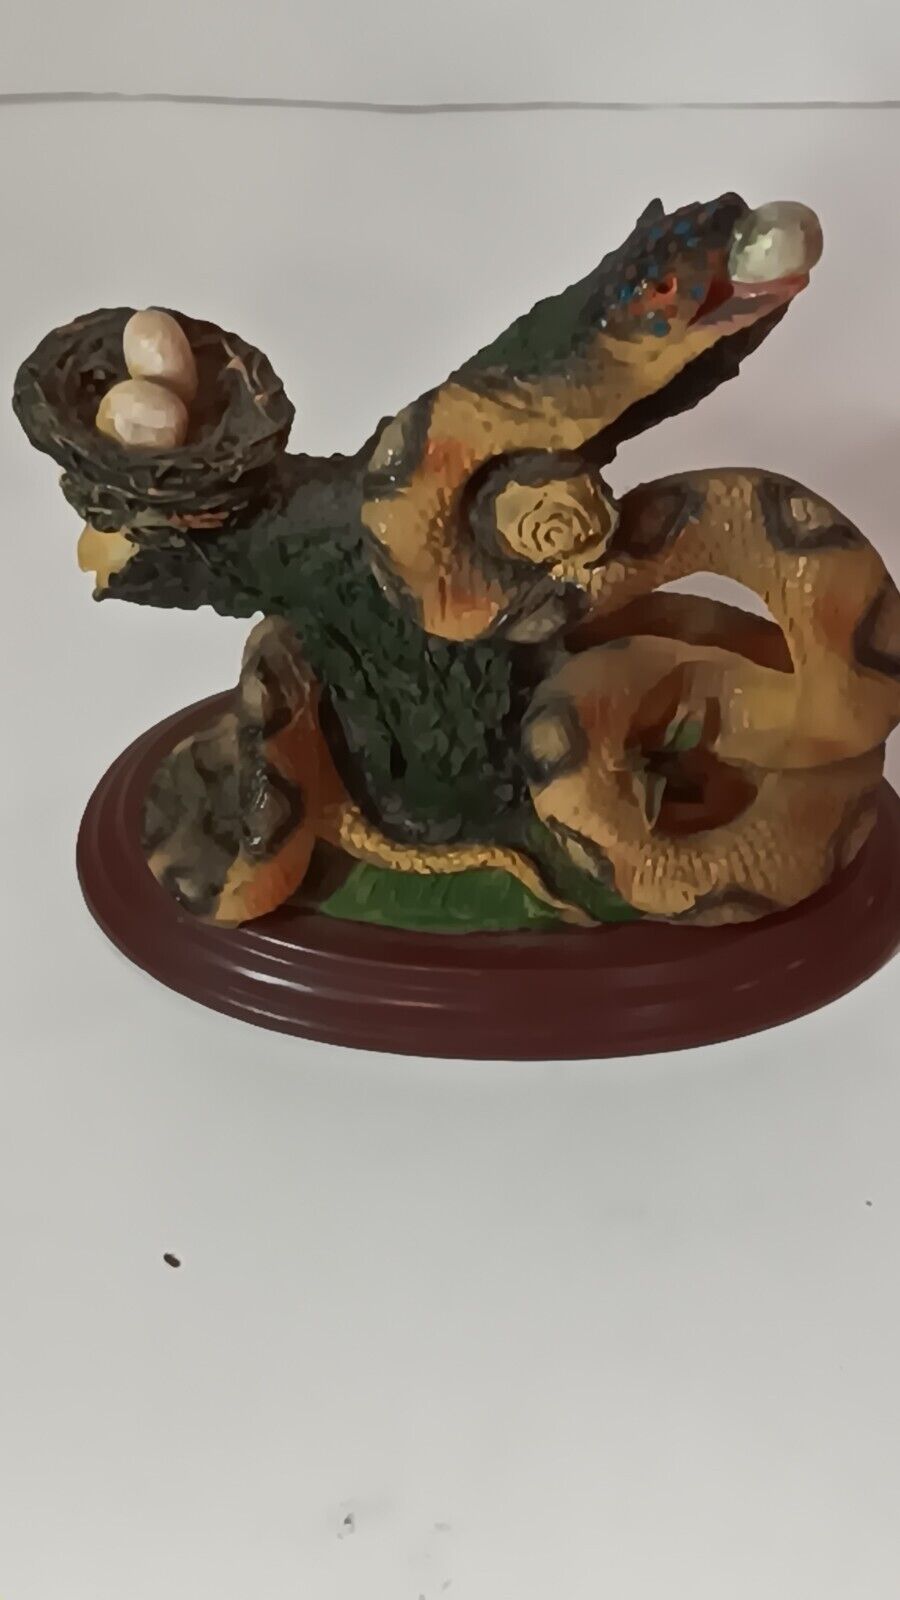 K's Collection Limited Edition Sneeky Snakes Figurine 4in